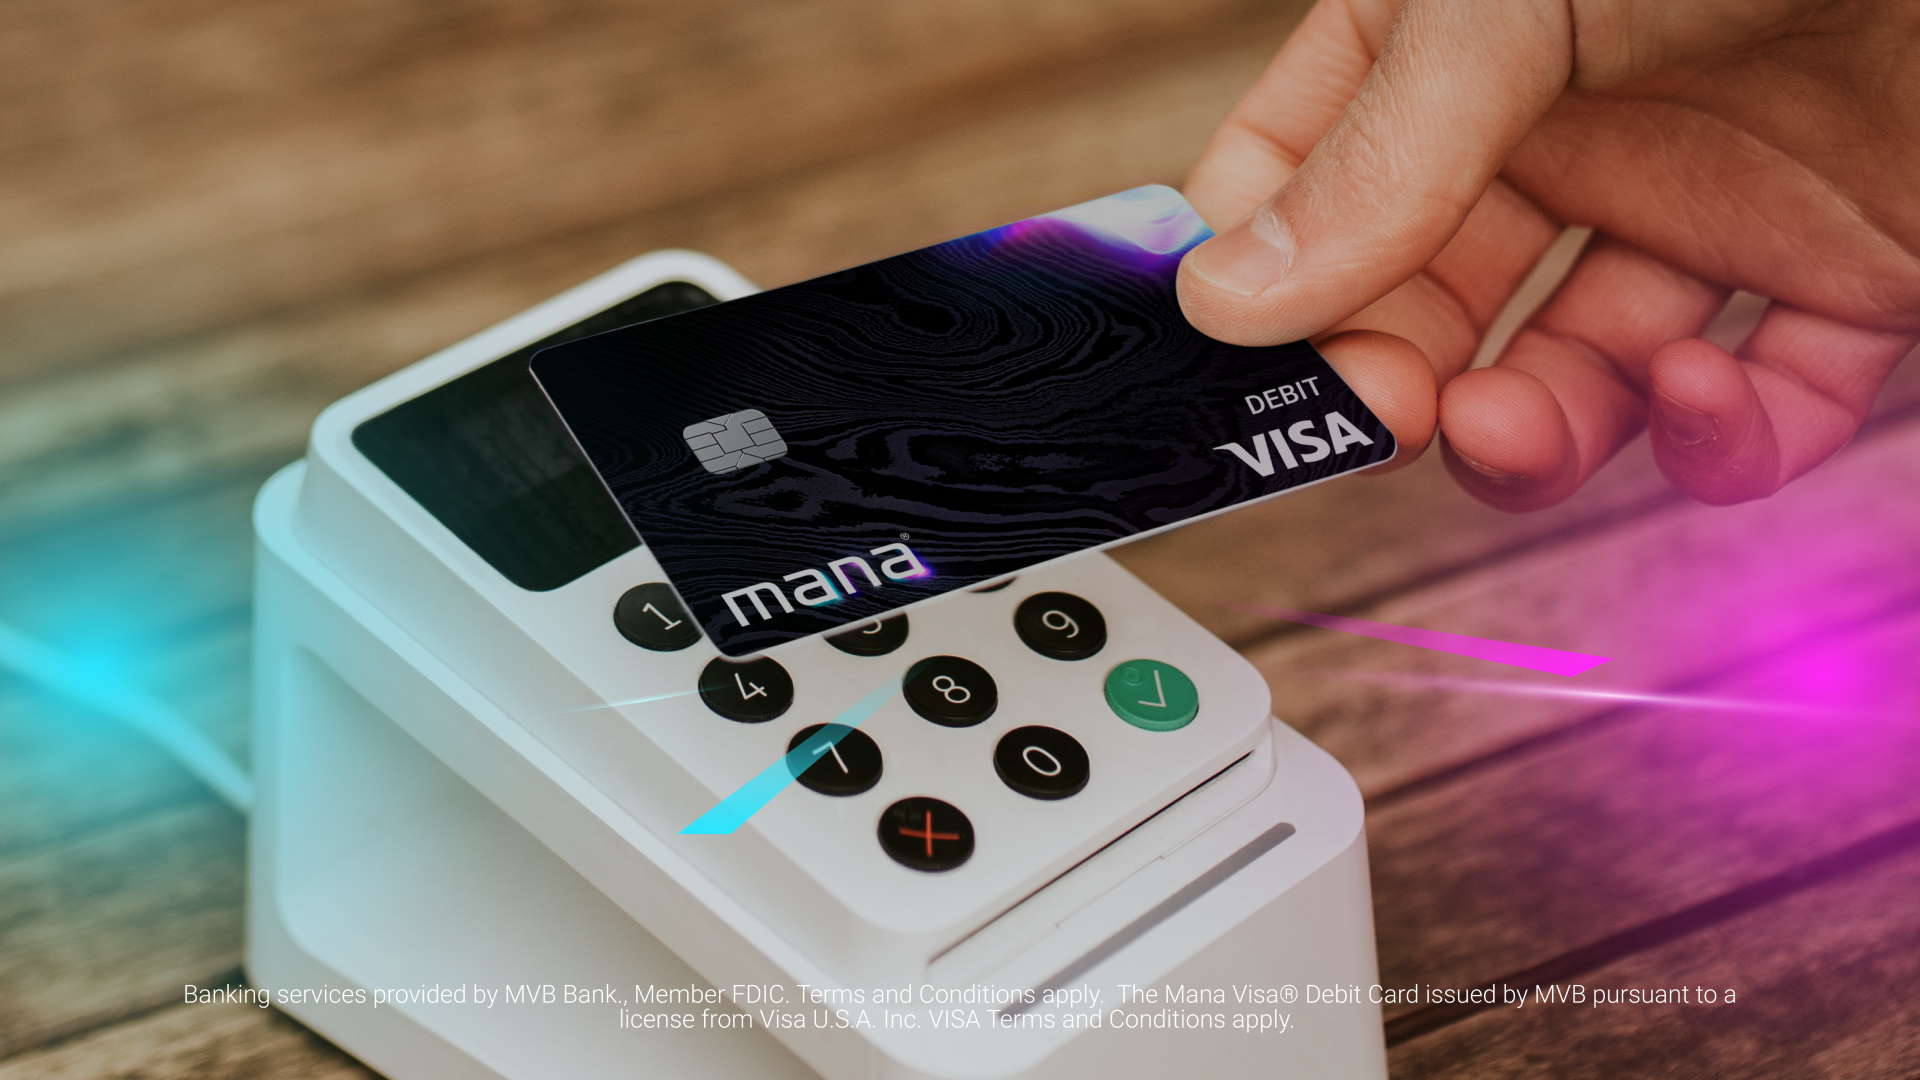 Mana debit card: everything you need to know